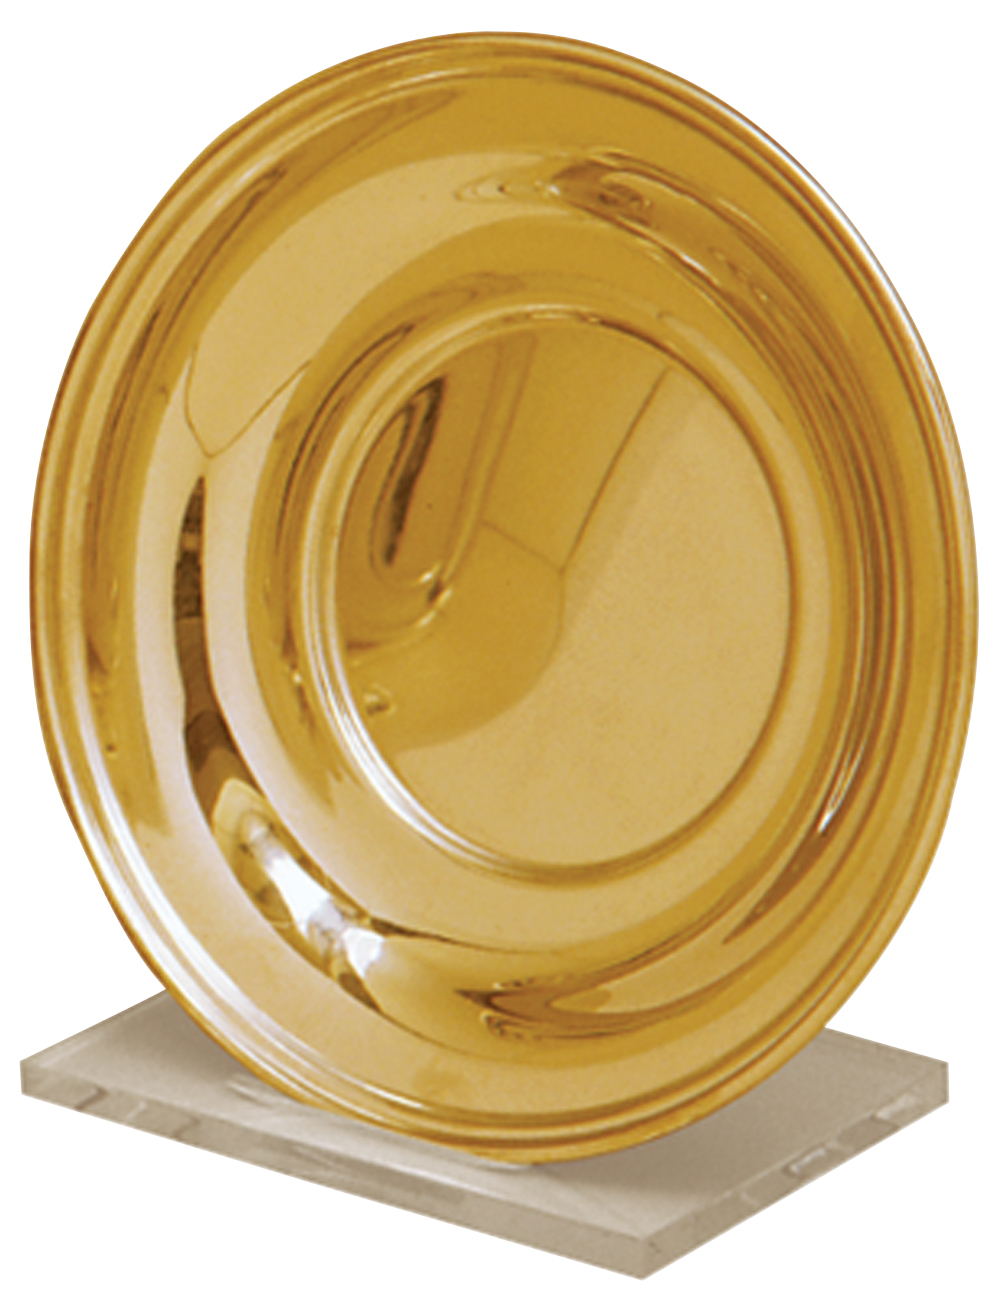 Scale Paten 6" Gold Plated Pewter K316